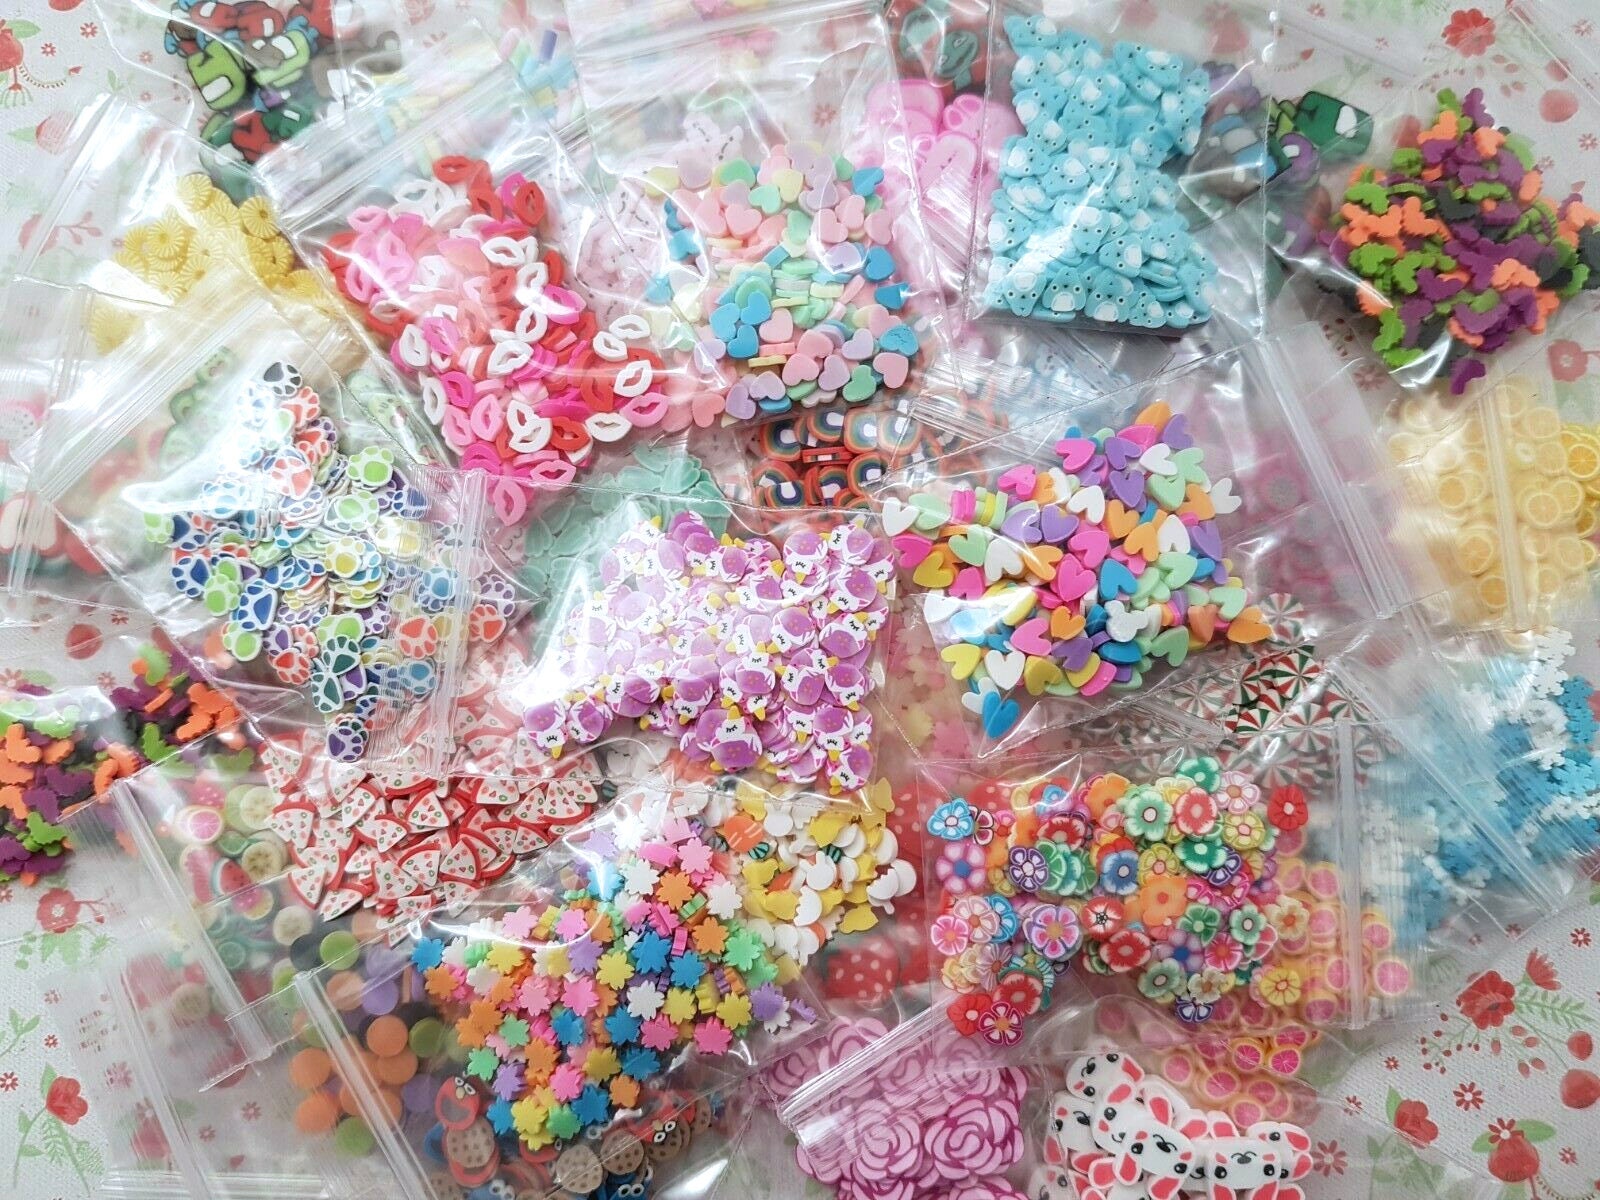 Simulation Rice Beads Fishbowl Beads Slime Accessories Polymer Clay Charms  DIY Mixed Materials Crystal Mud Slime Filler 